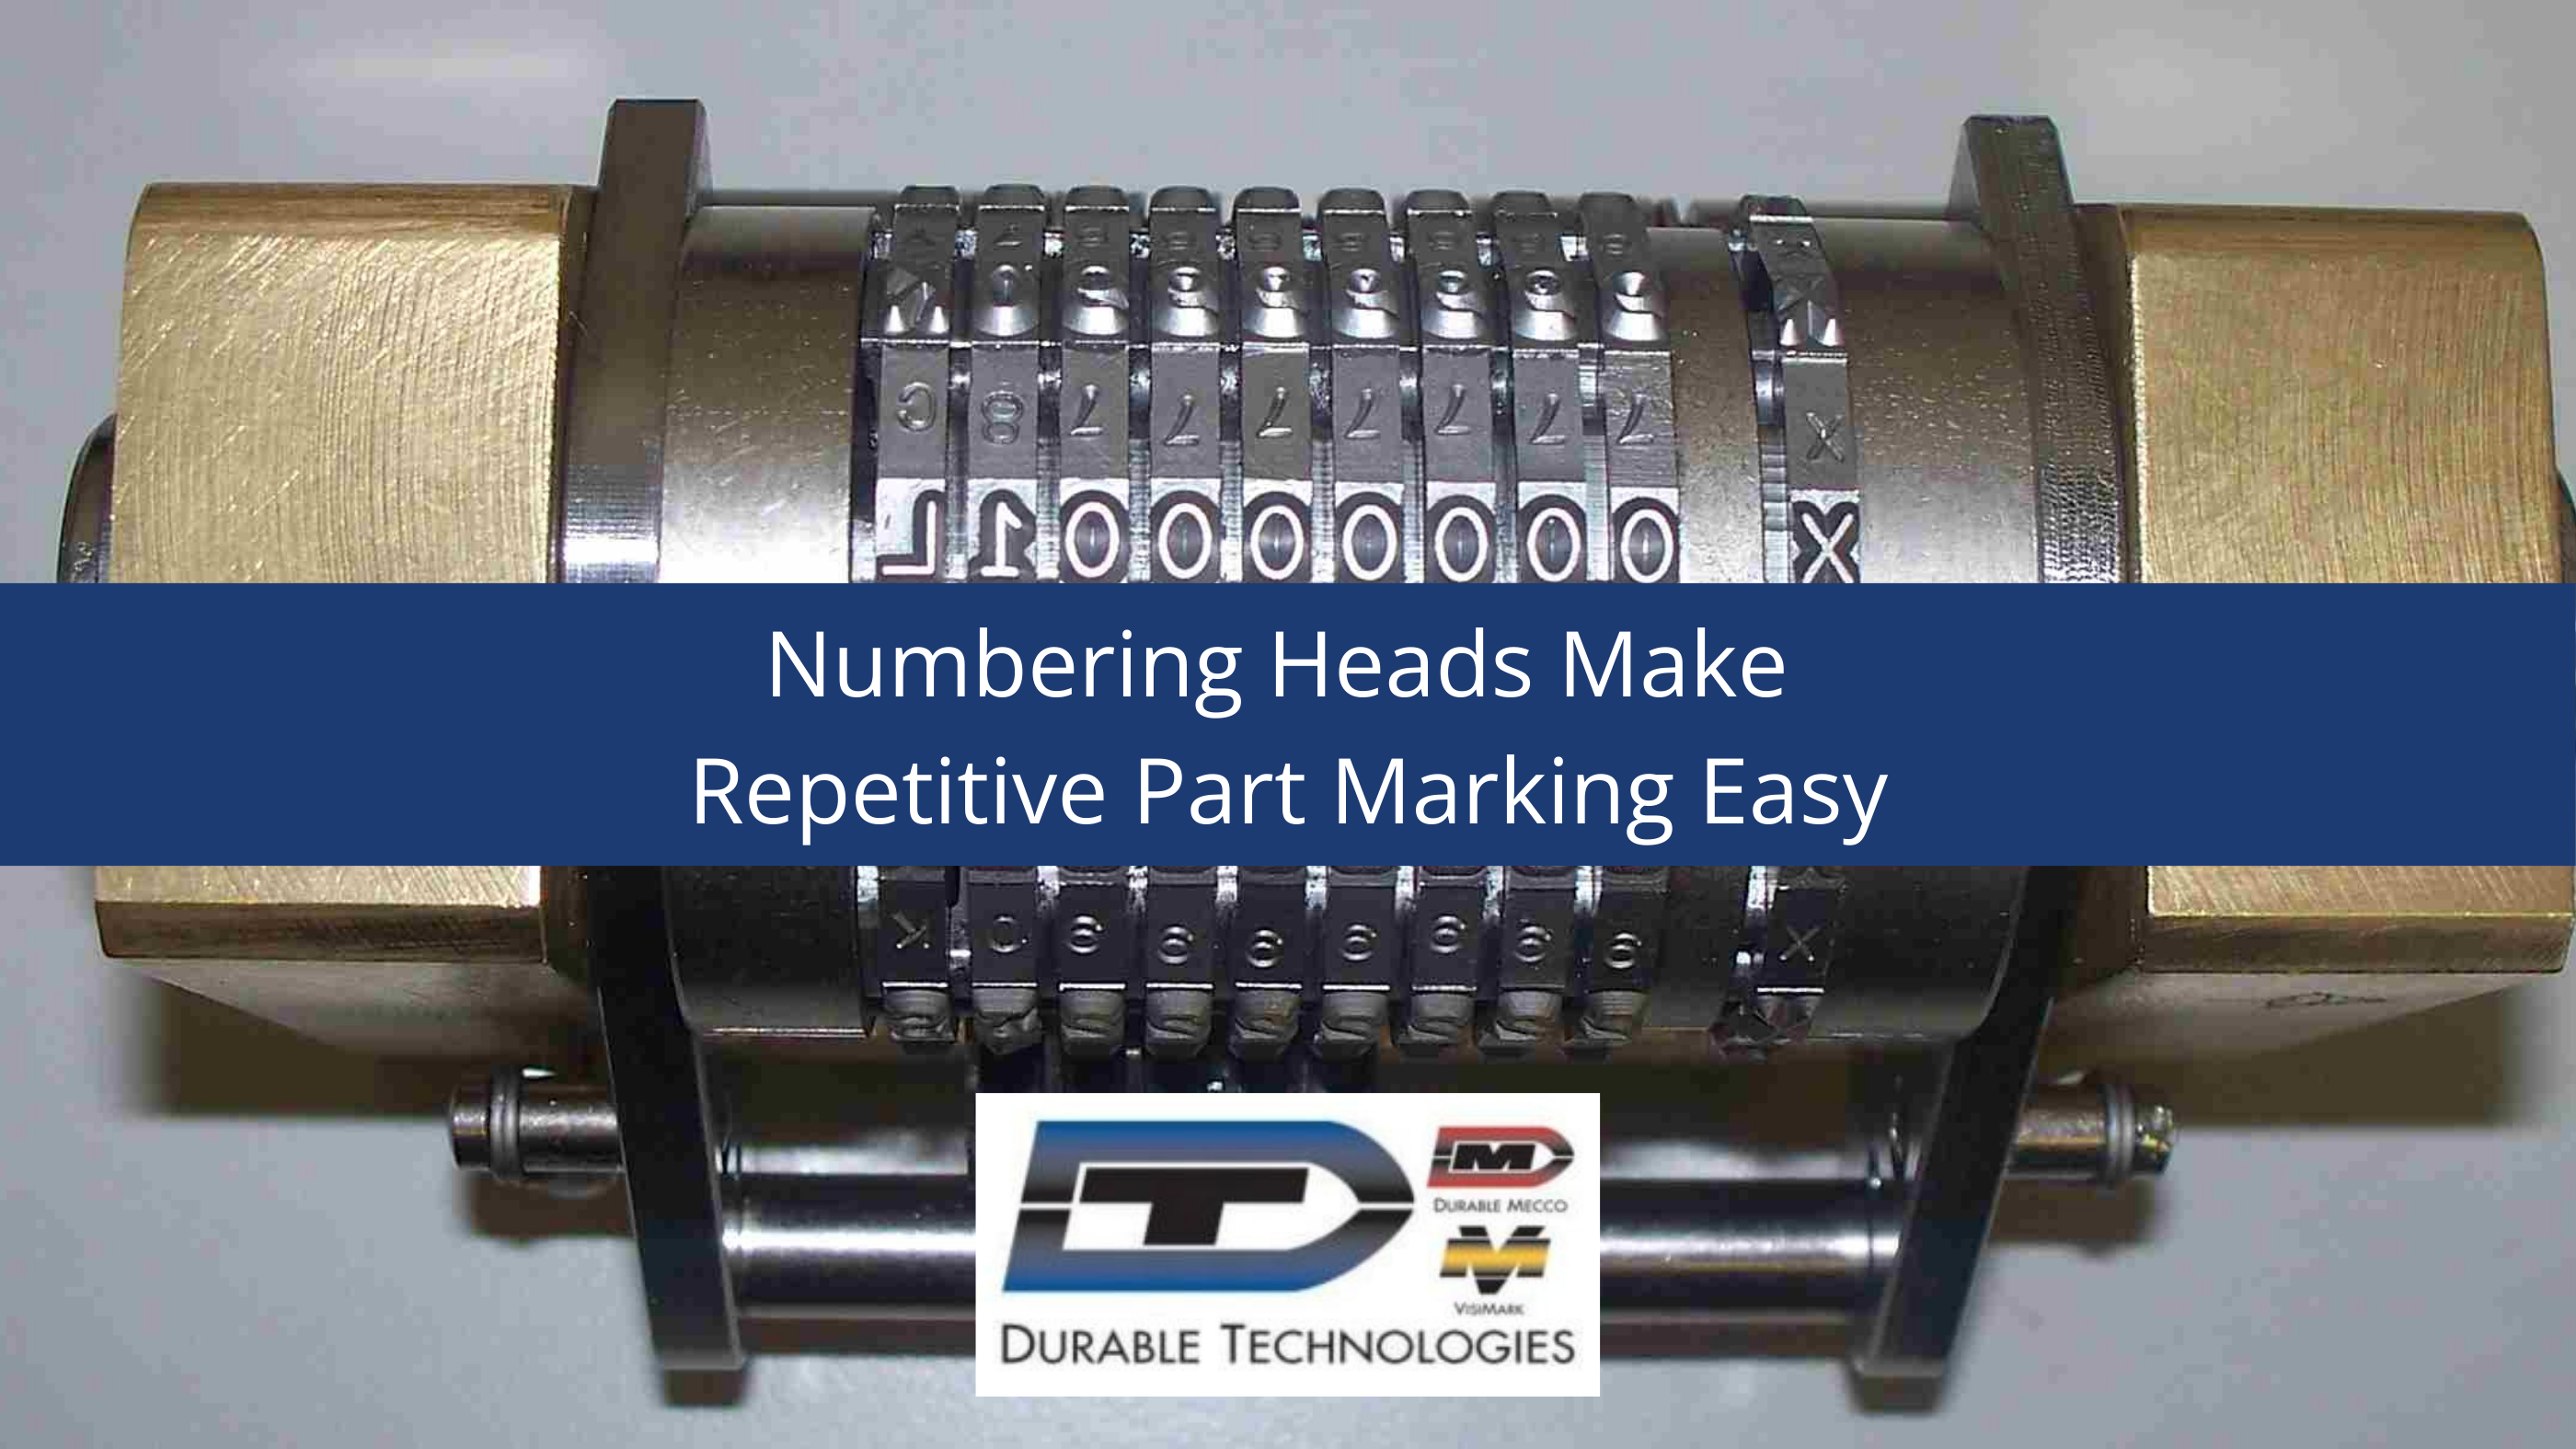 Numbering Heads Make Repetitive Part Marking Easy